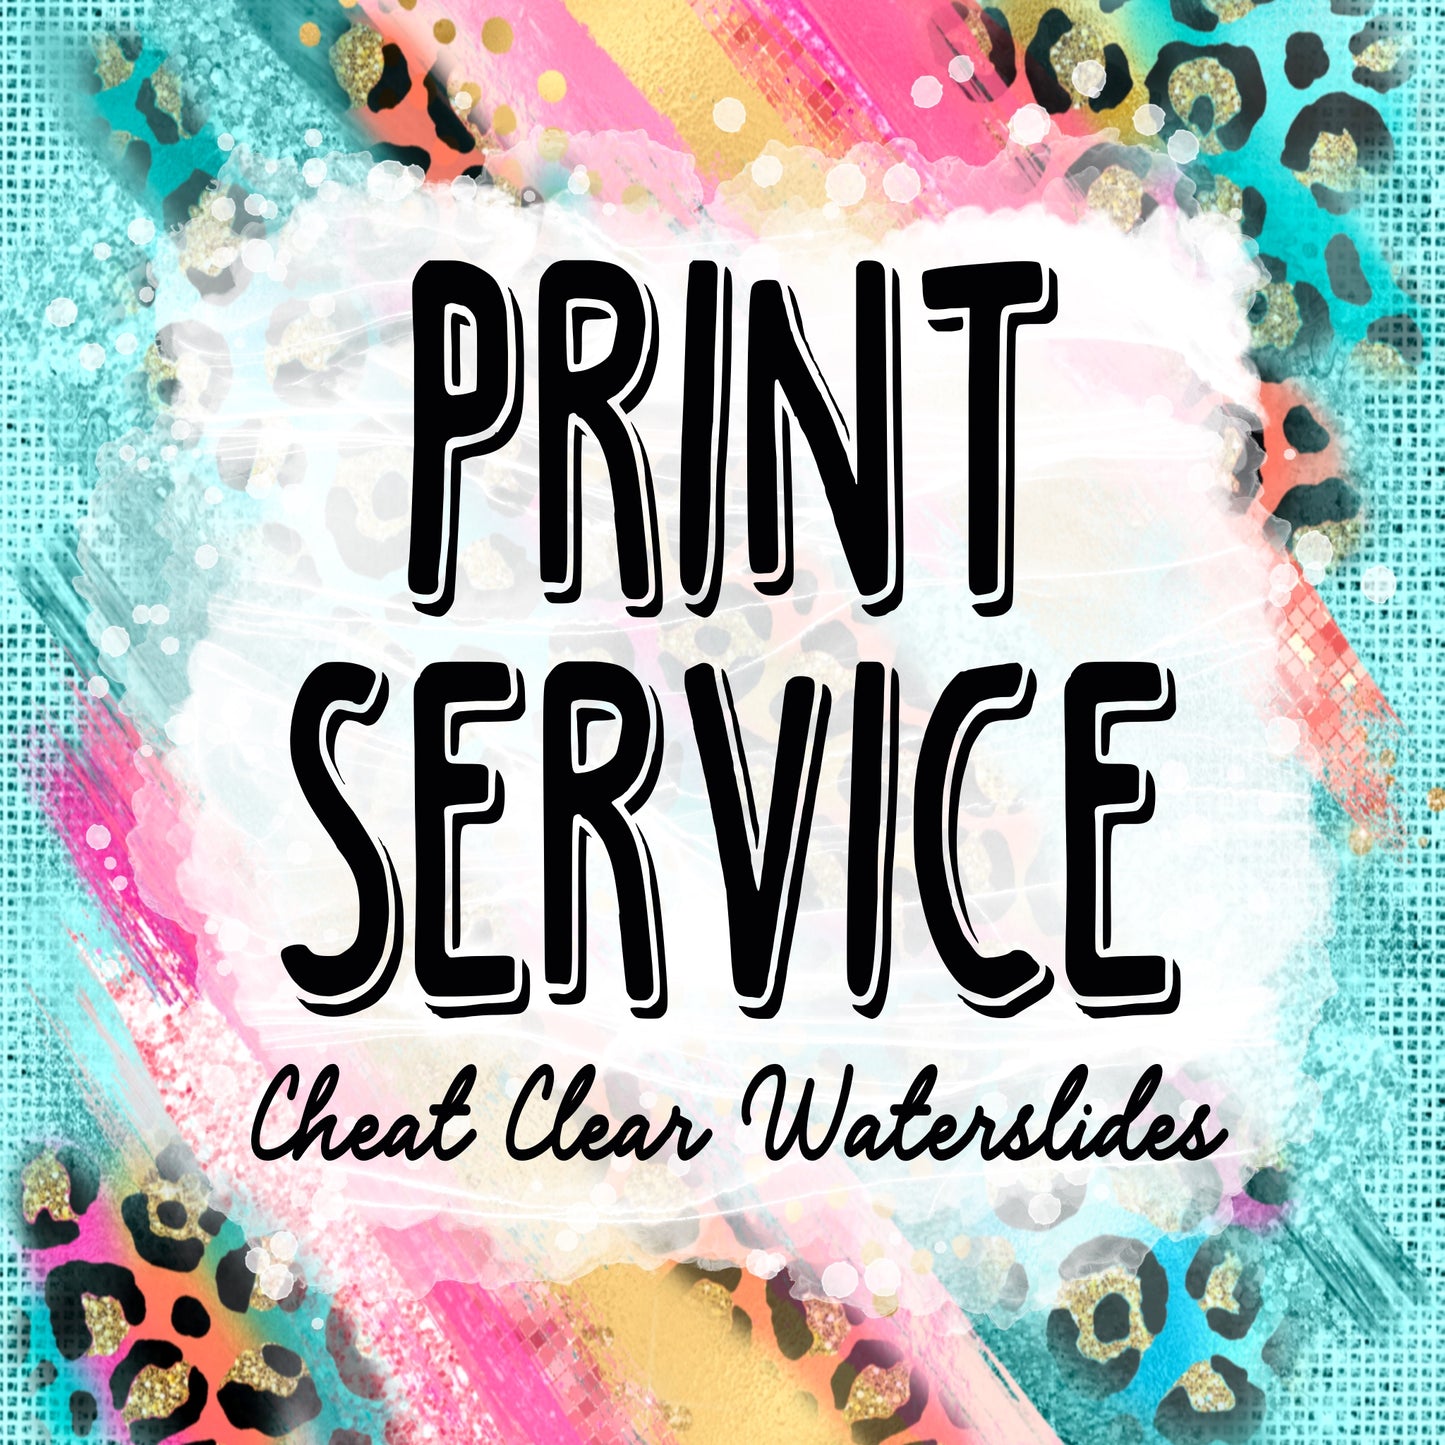 Print Service - Cheat Clear Waterslide® Laser Printed